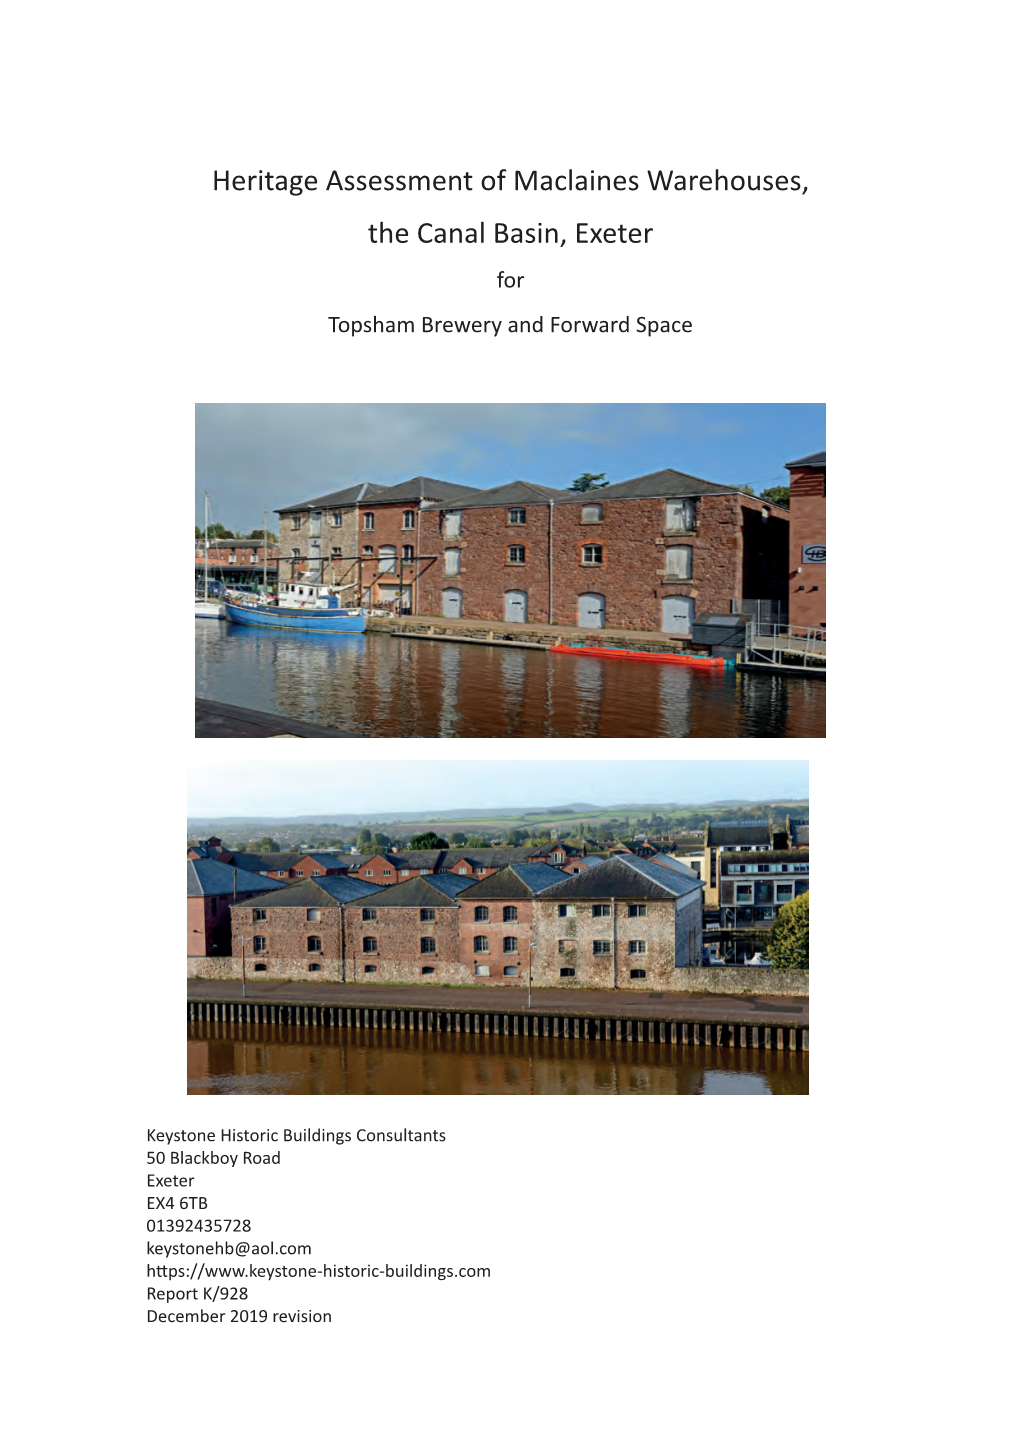 Heritage Assessment of Maclaines Warehouses, the Canal Basin, Exeter for Topsham Brewery and Forward Space